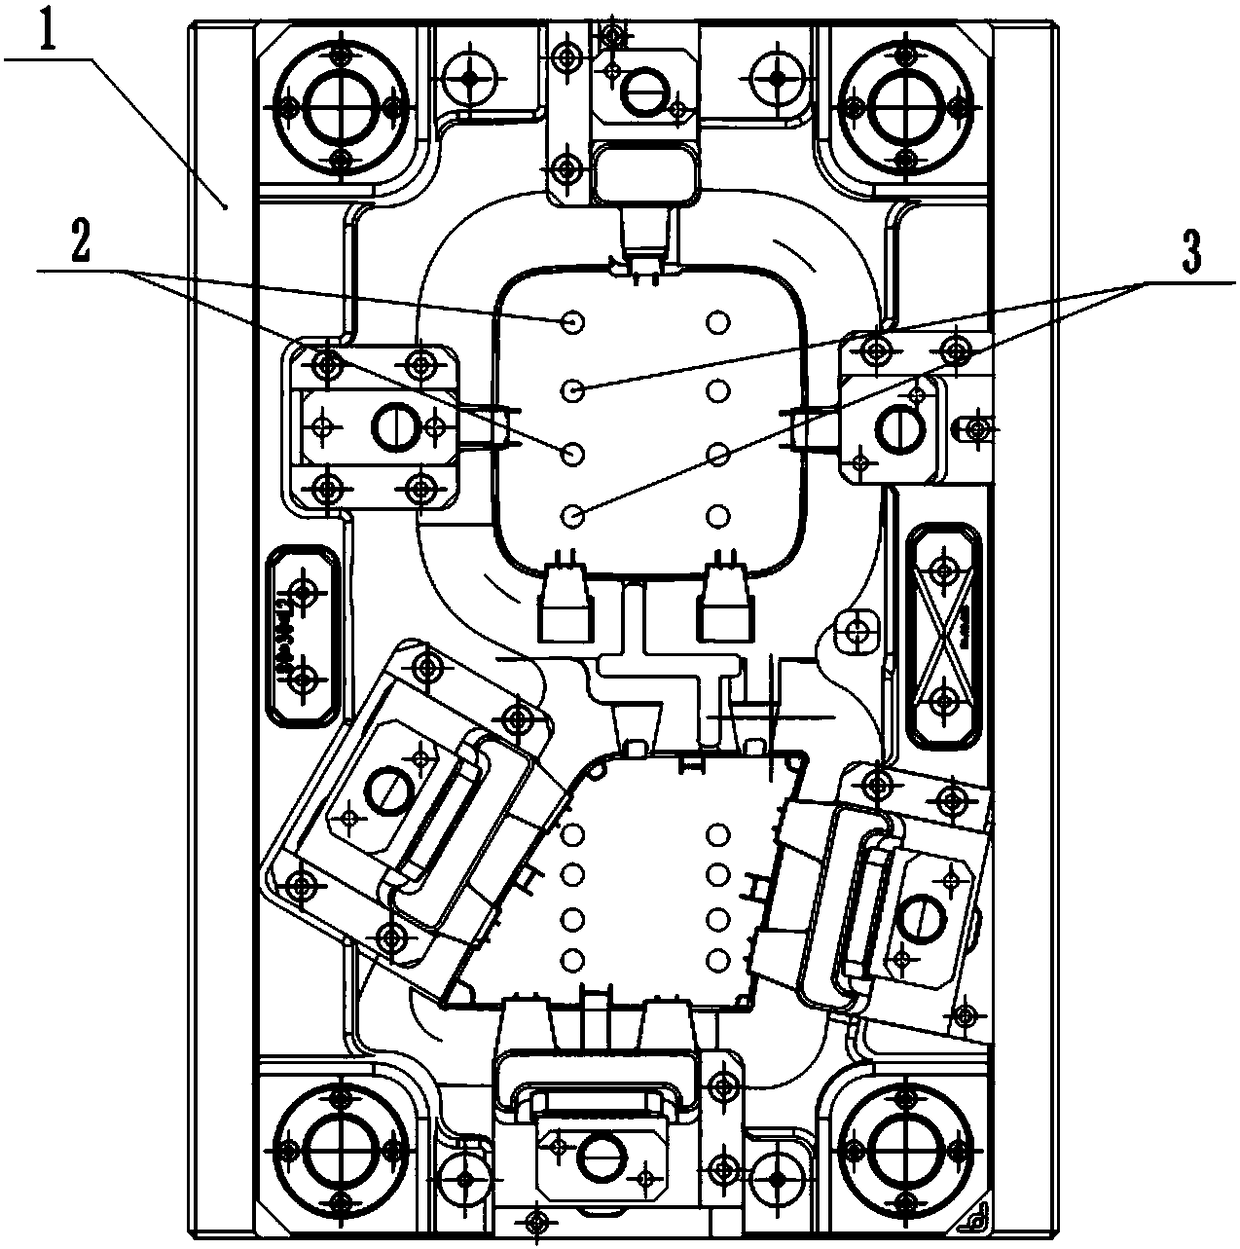 Ejection mechanism for engine flip injection mold